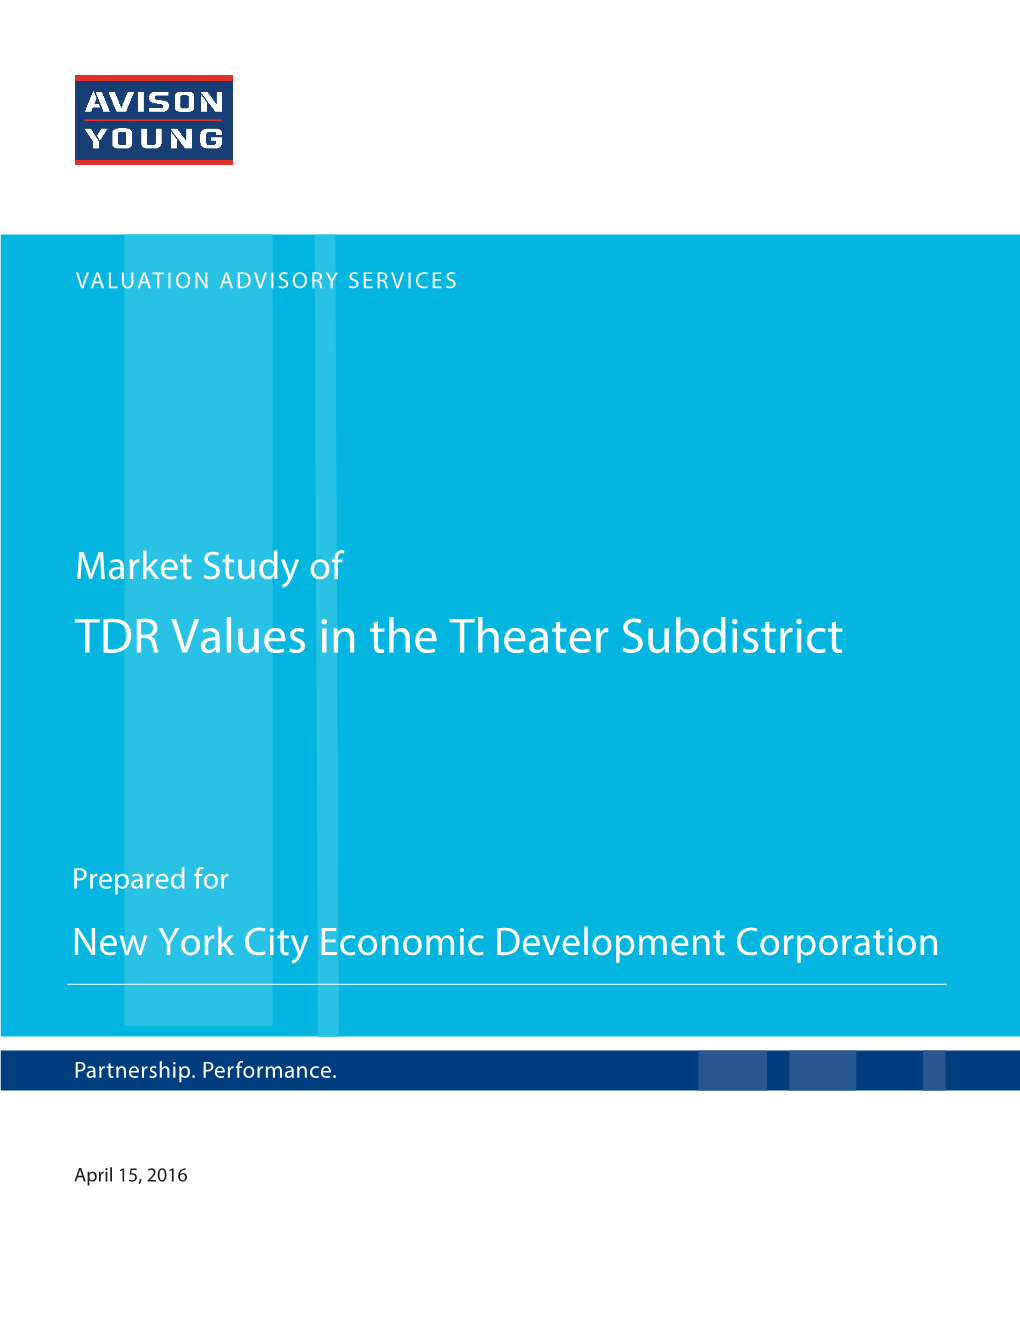 View the Market Study of TDR Values in the Theater Subdistrict